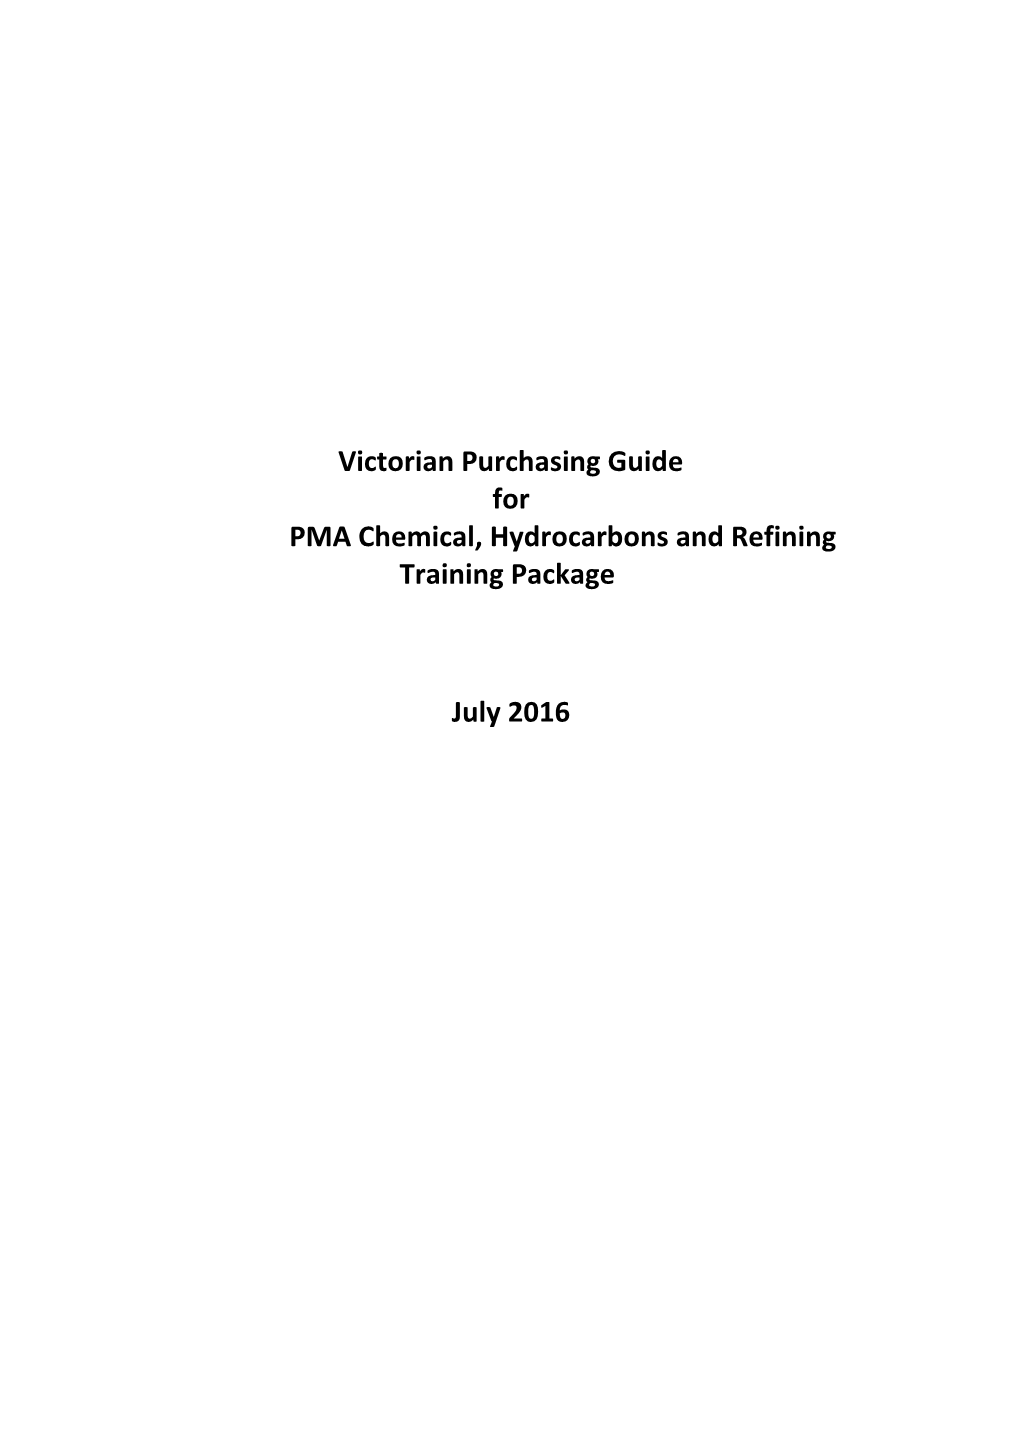 Vctorian Purchasing Guide for PMA Chermicals, Hydrocarbons and Refining